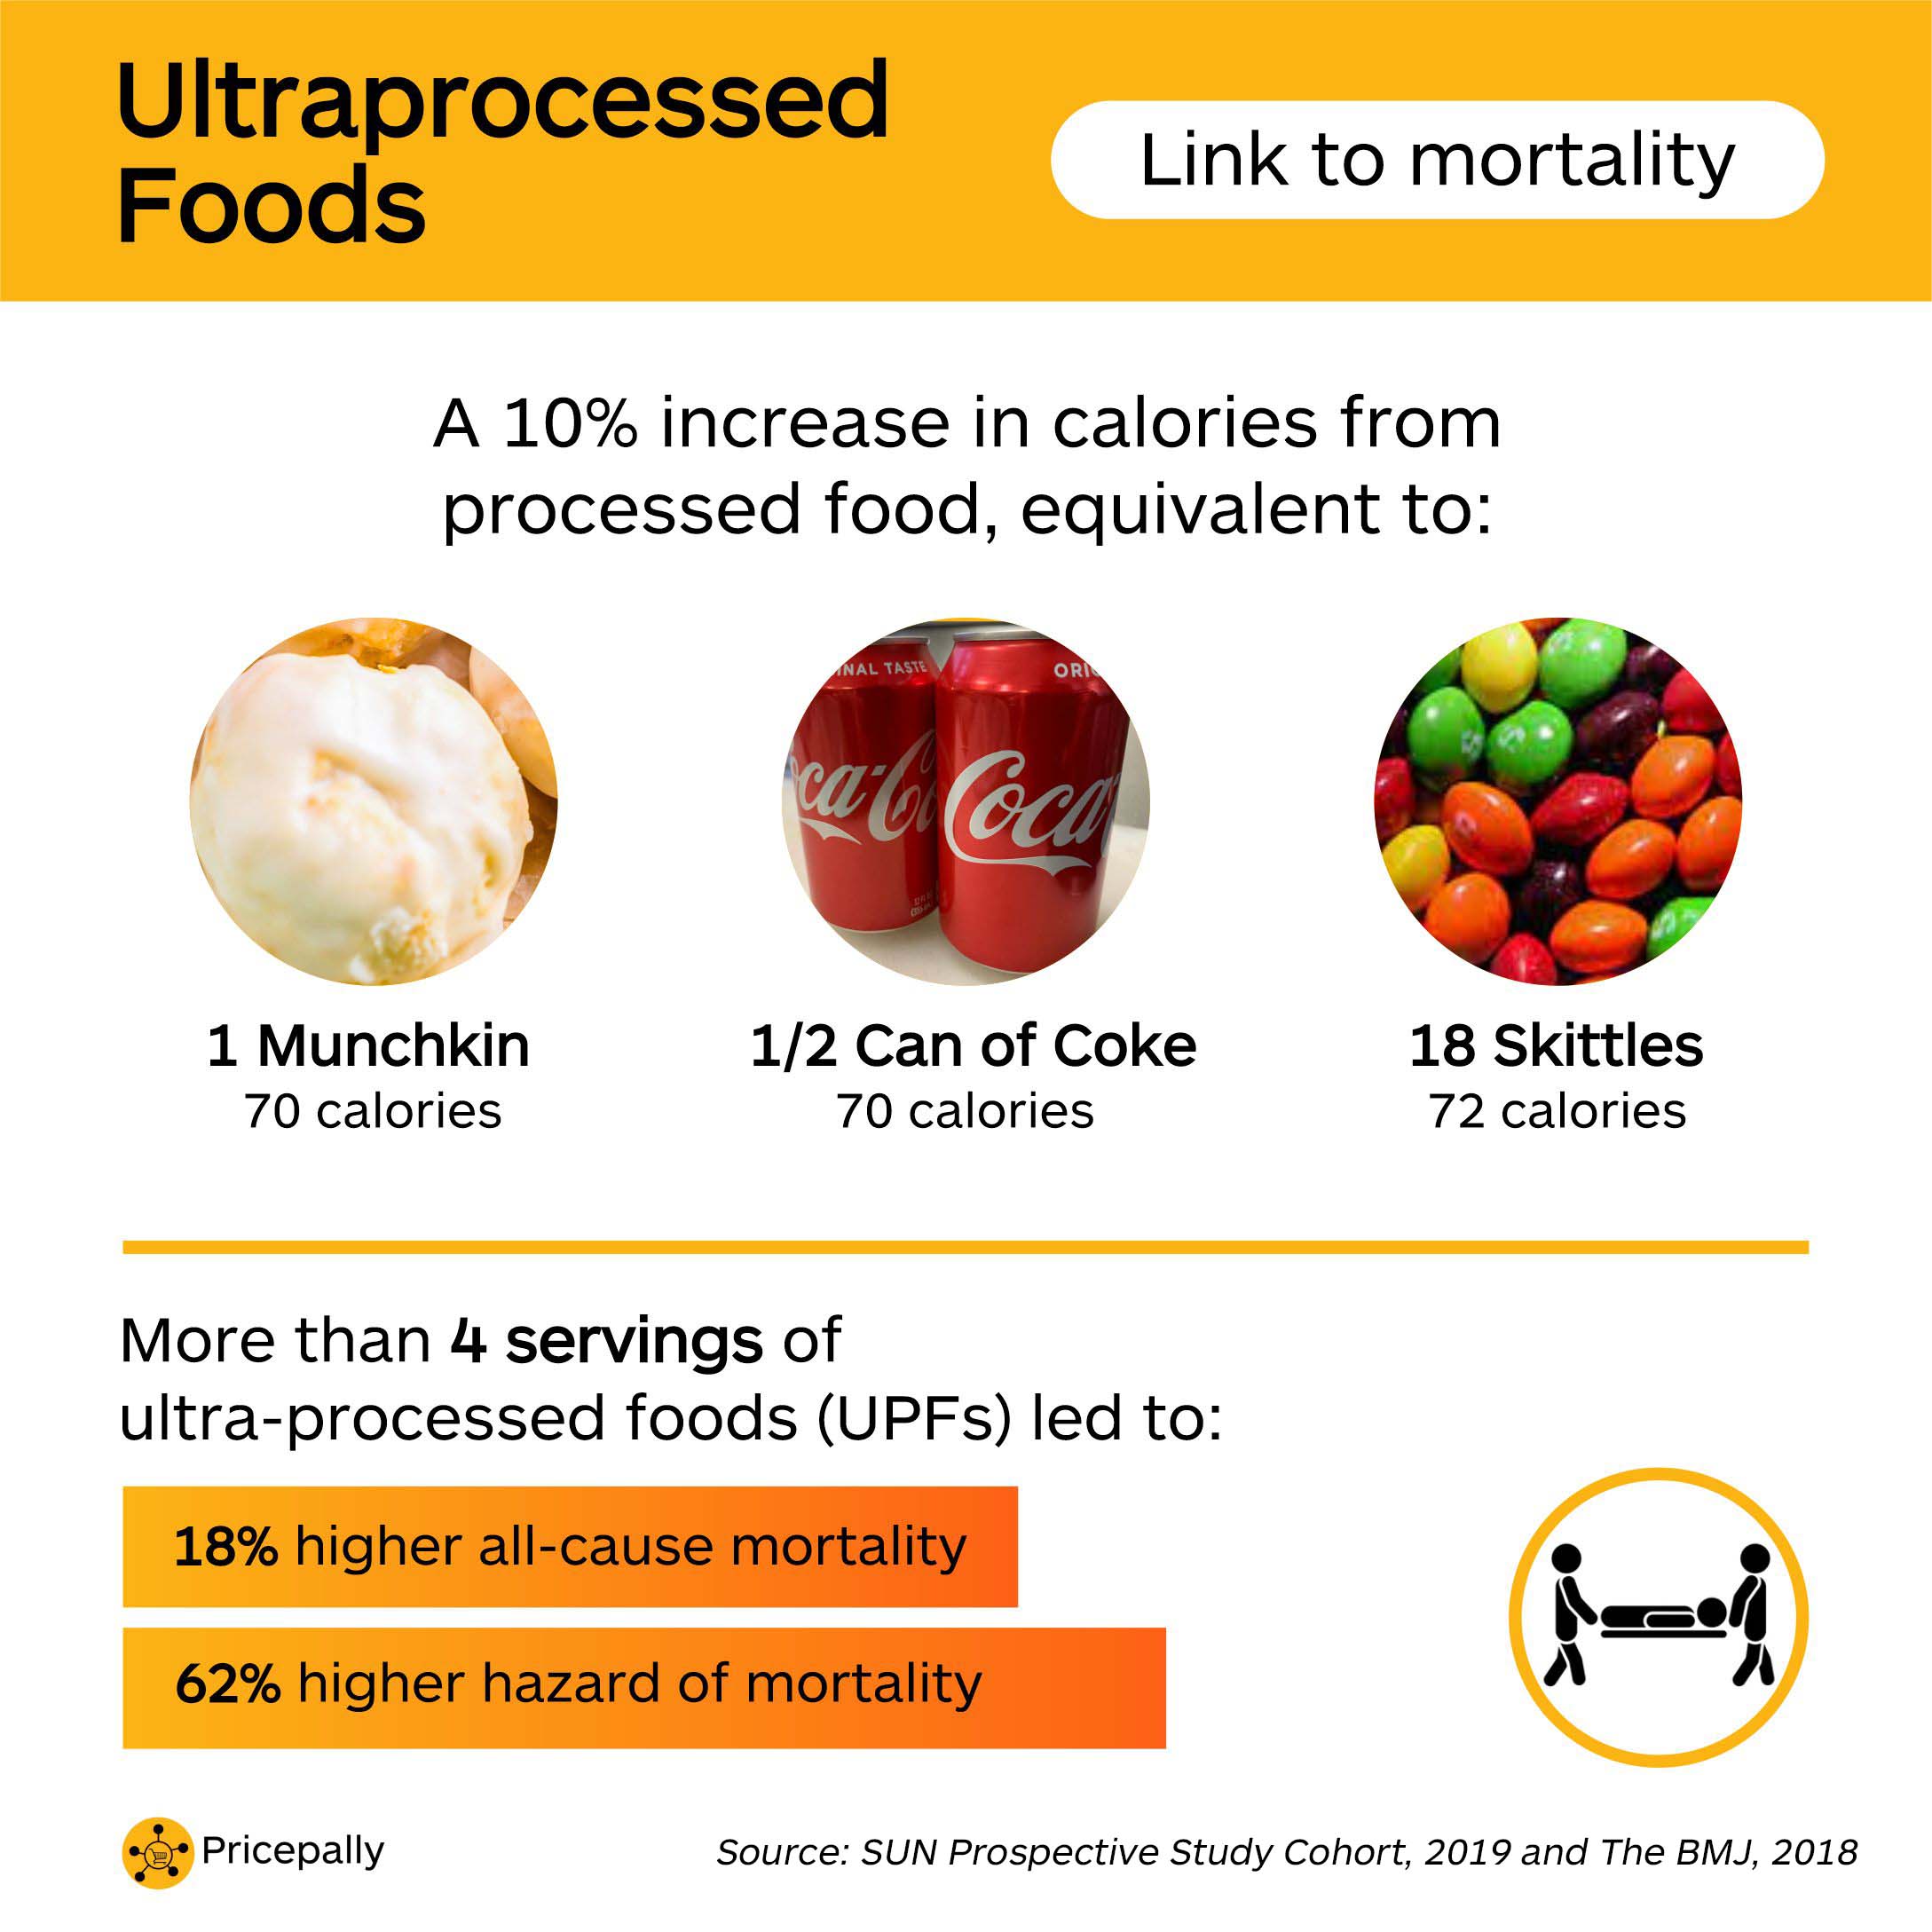 The negative effects of ultraprocessed foods (UPFs) on mortality